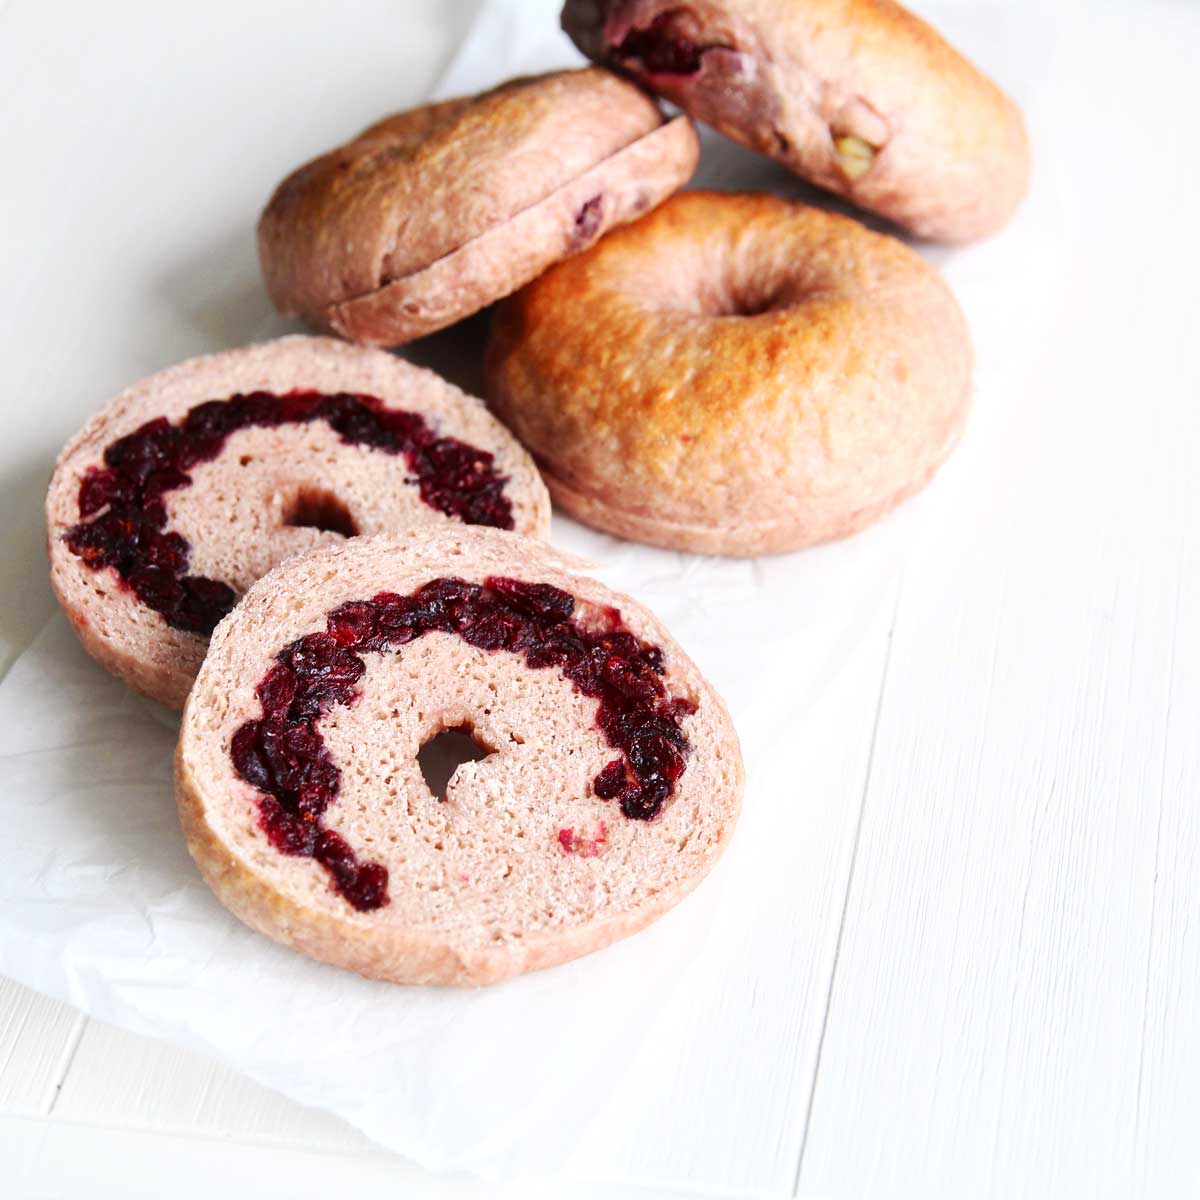 How To Make Stuffed Cranberry Bagels With Canned Cranberry Sauce - Carrot Banana Bread